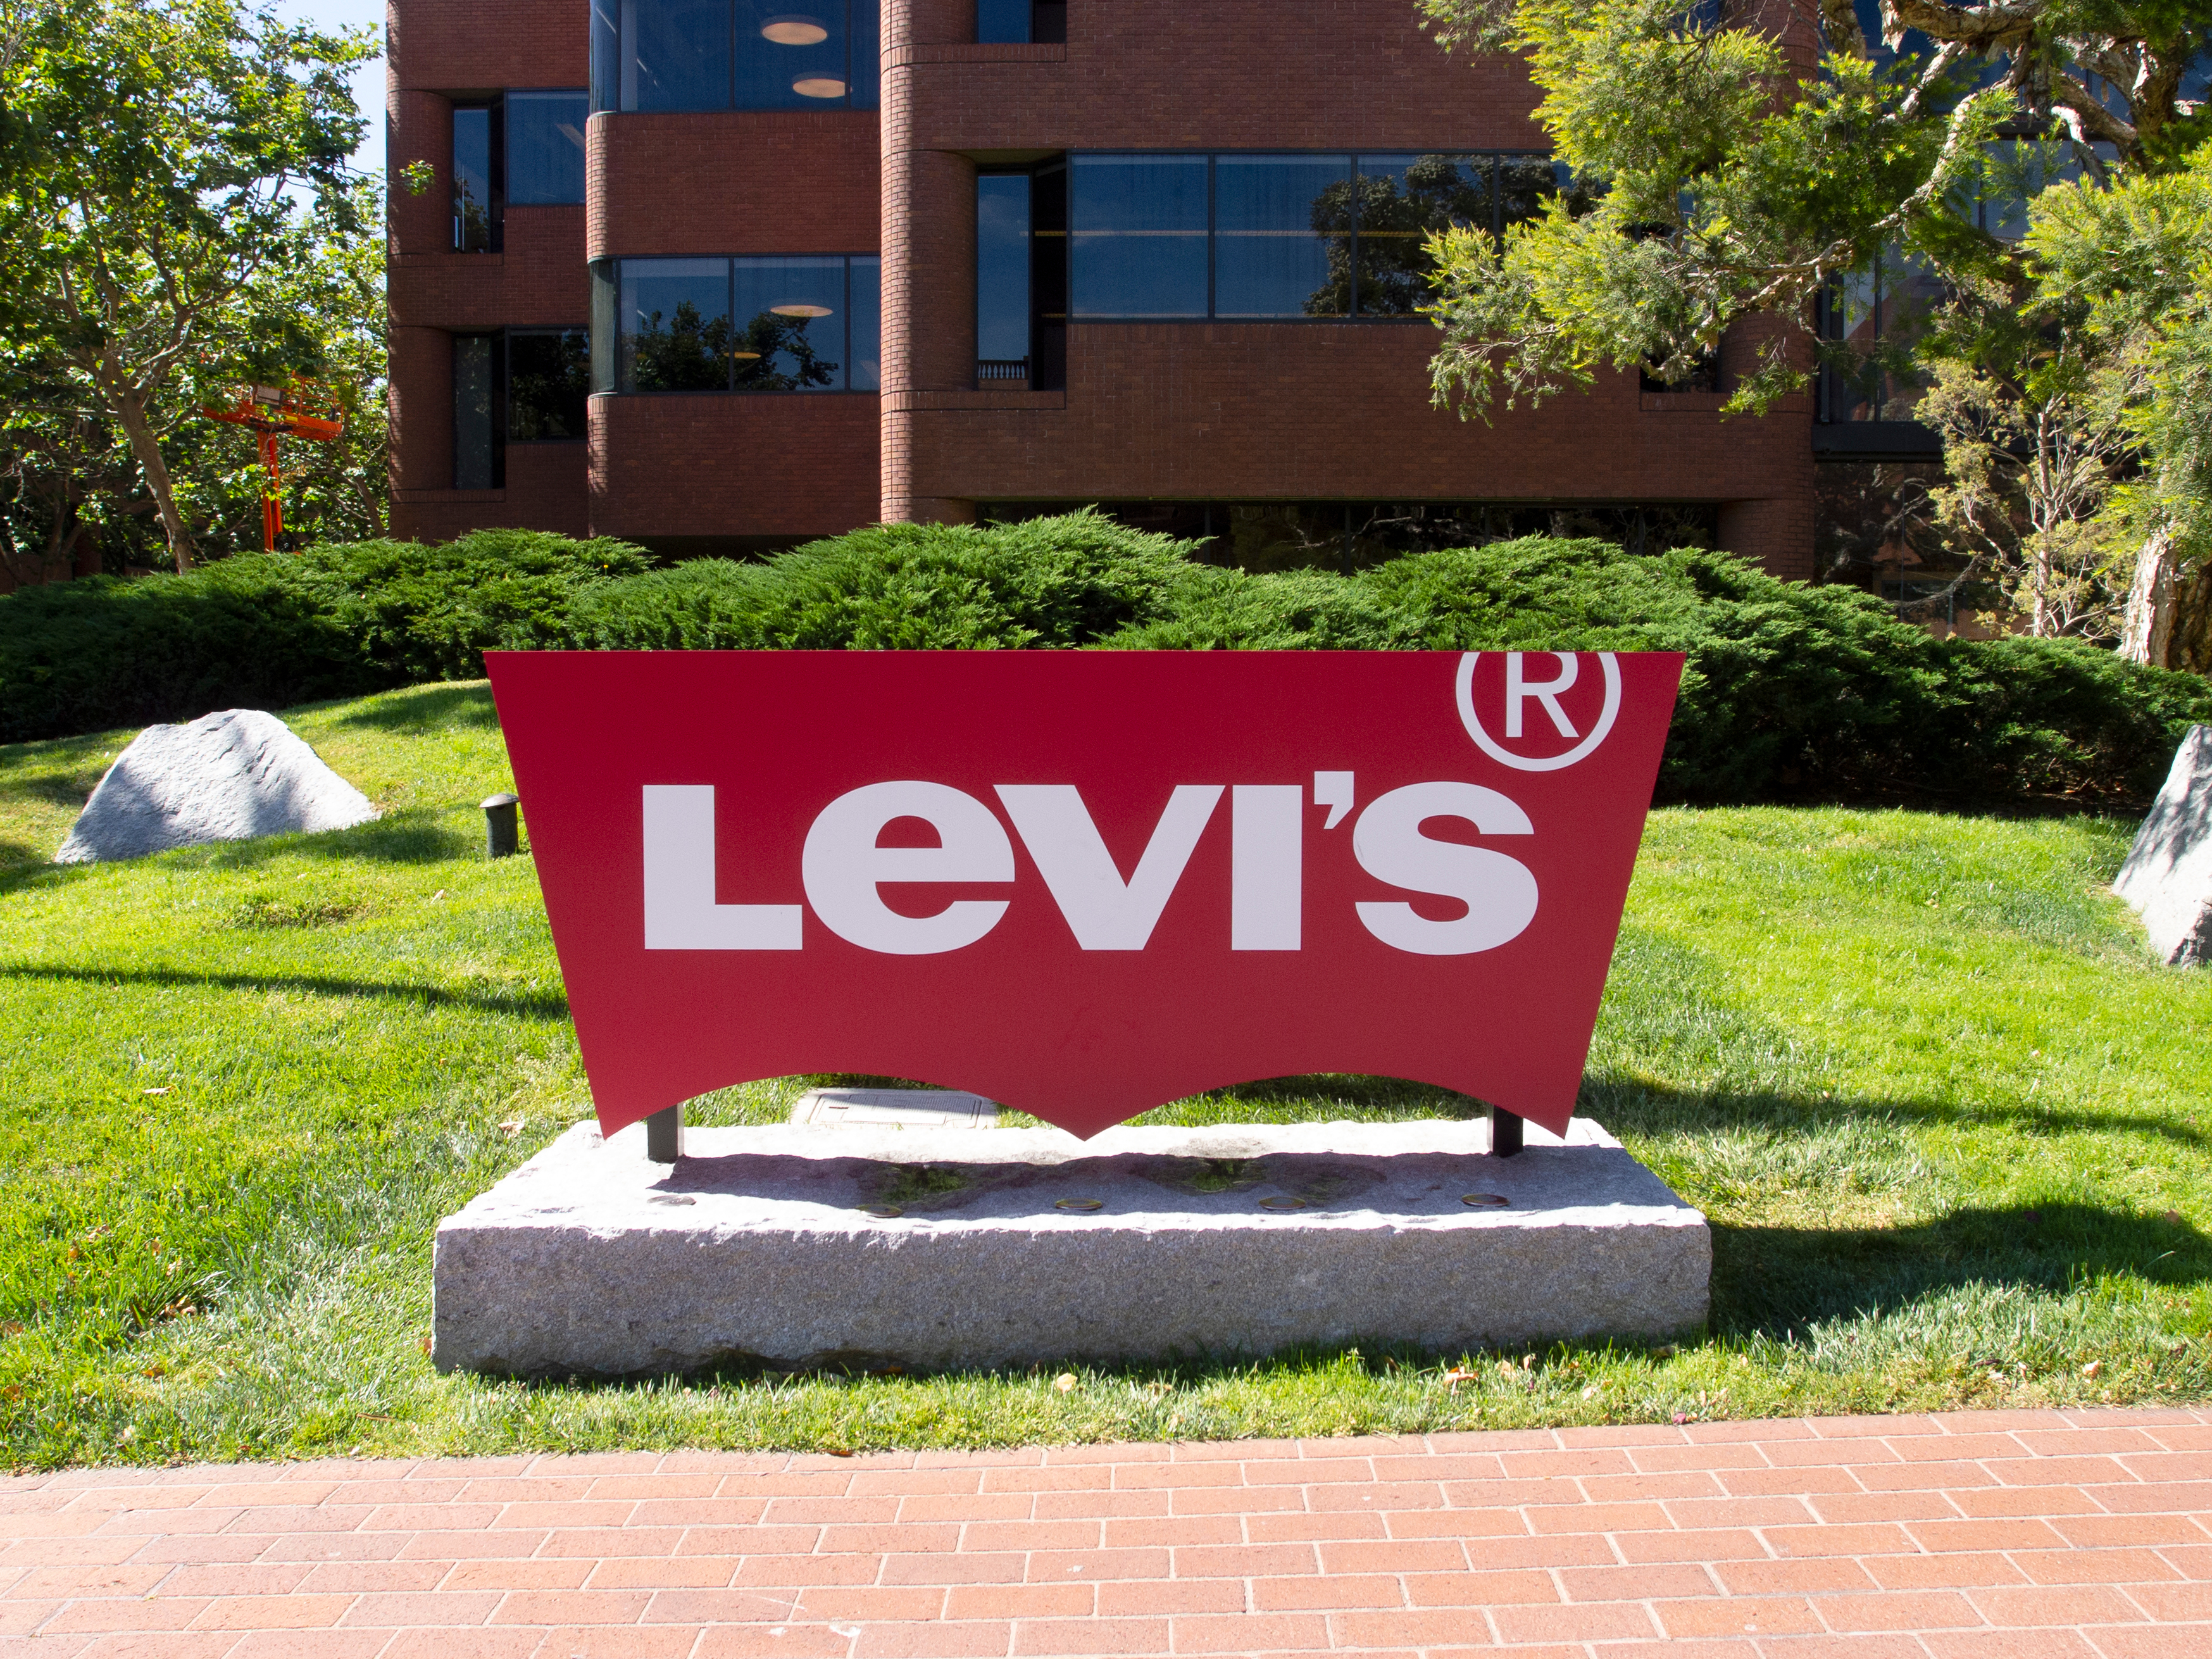 Bright red Levi’s sign in front of grass lawn at Levi’s Plaza.